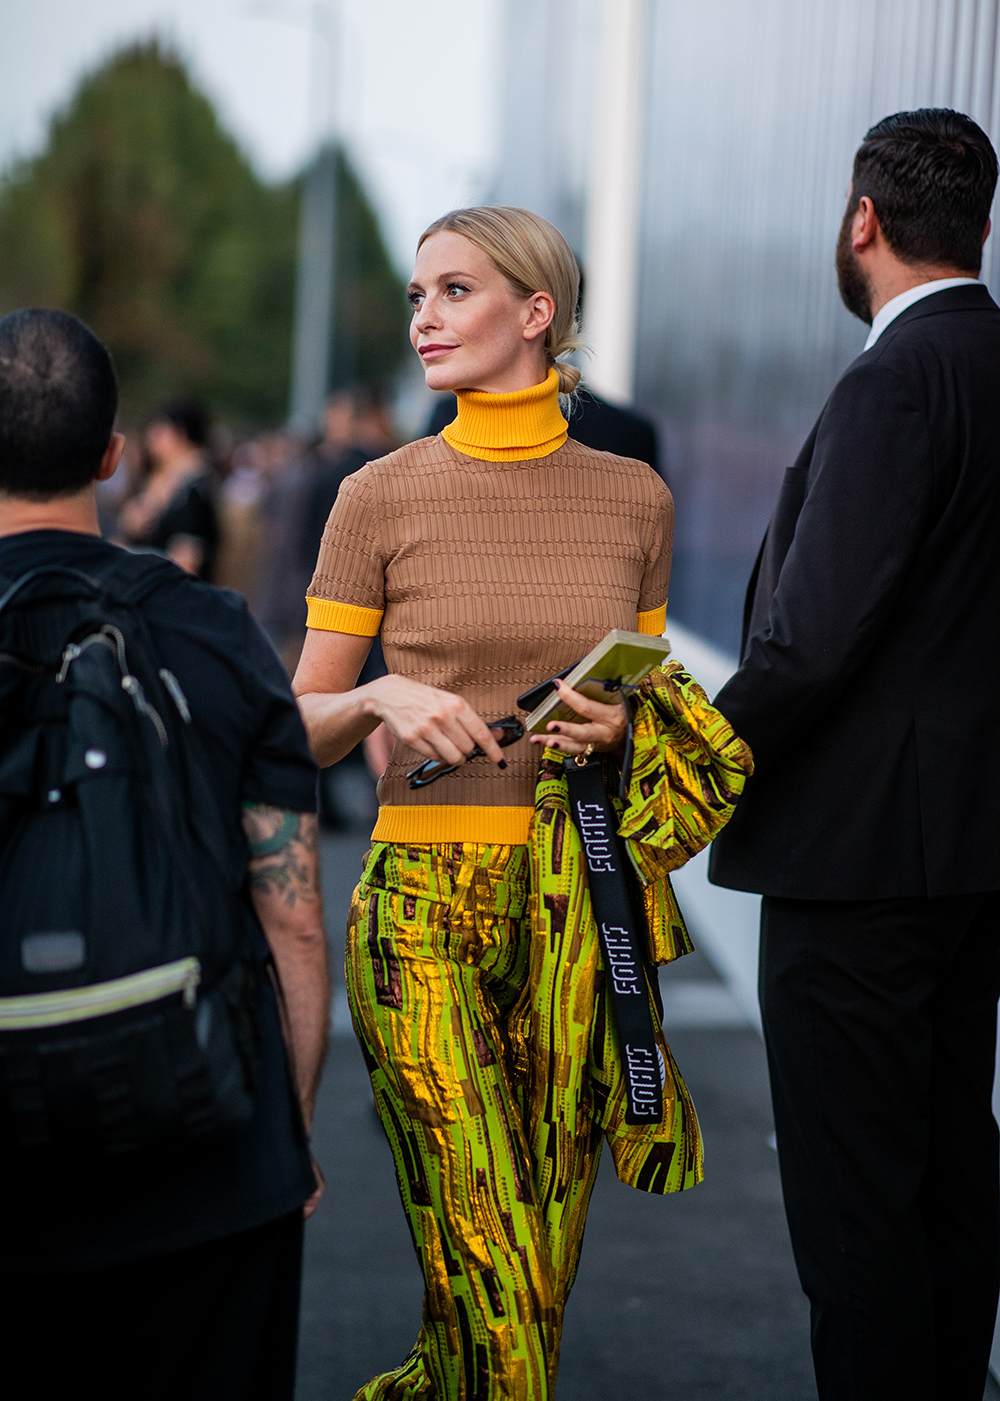 MILAN, ITALY - SEPTEMBER 20: Poppy Delevingne is seen outside Prada during Milan Fashion Week Spring/Summer 2019 on September 20, 2018 in Milan, Italy. (Photo by Christian Vierig/Getty Images)